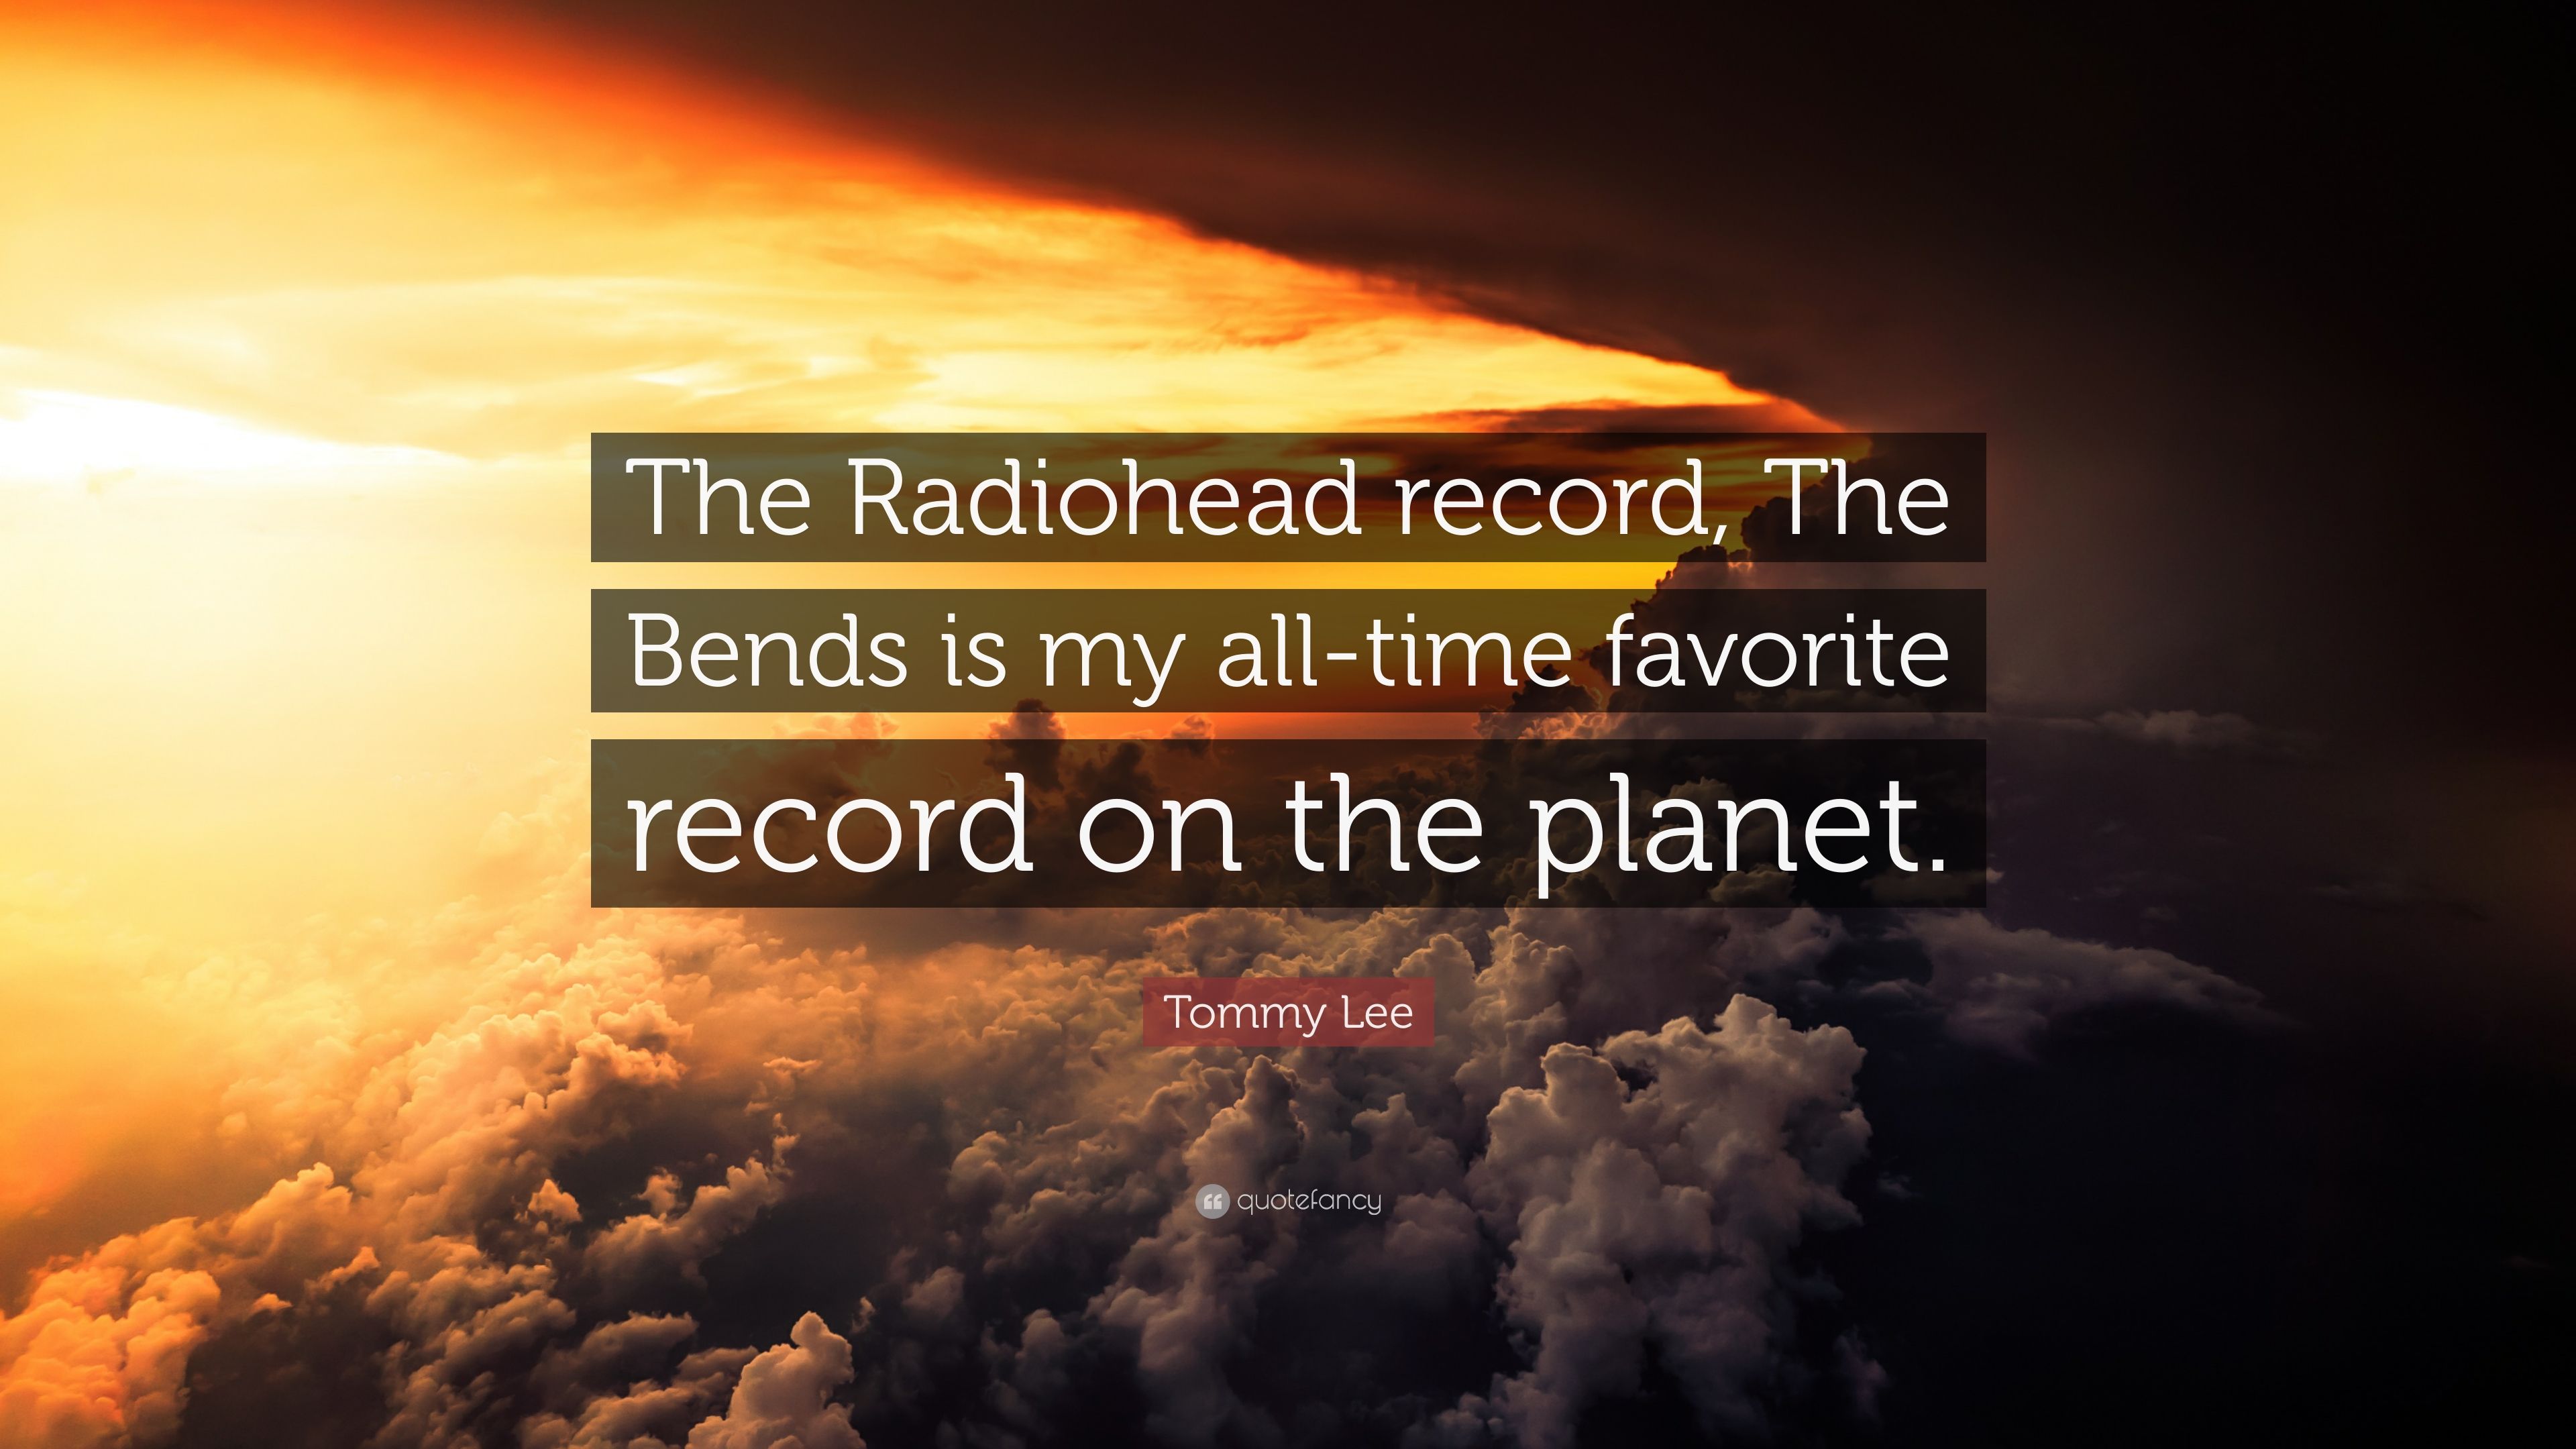 7 Quotes About Radiohead